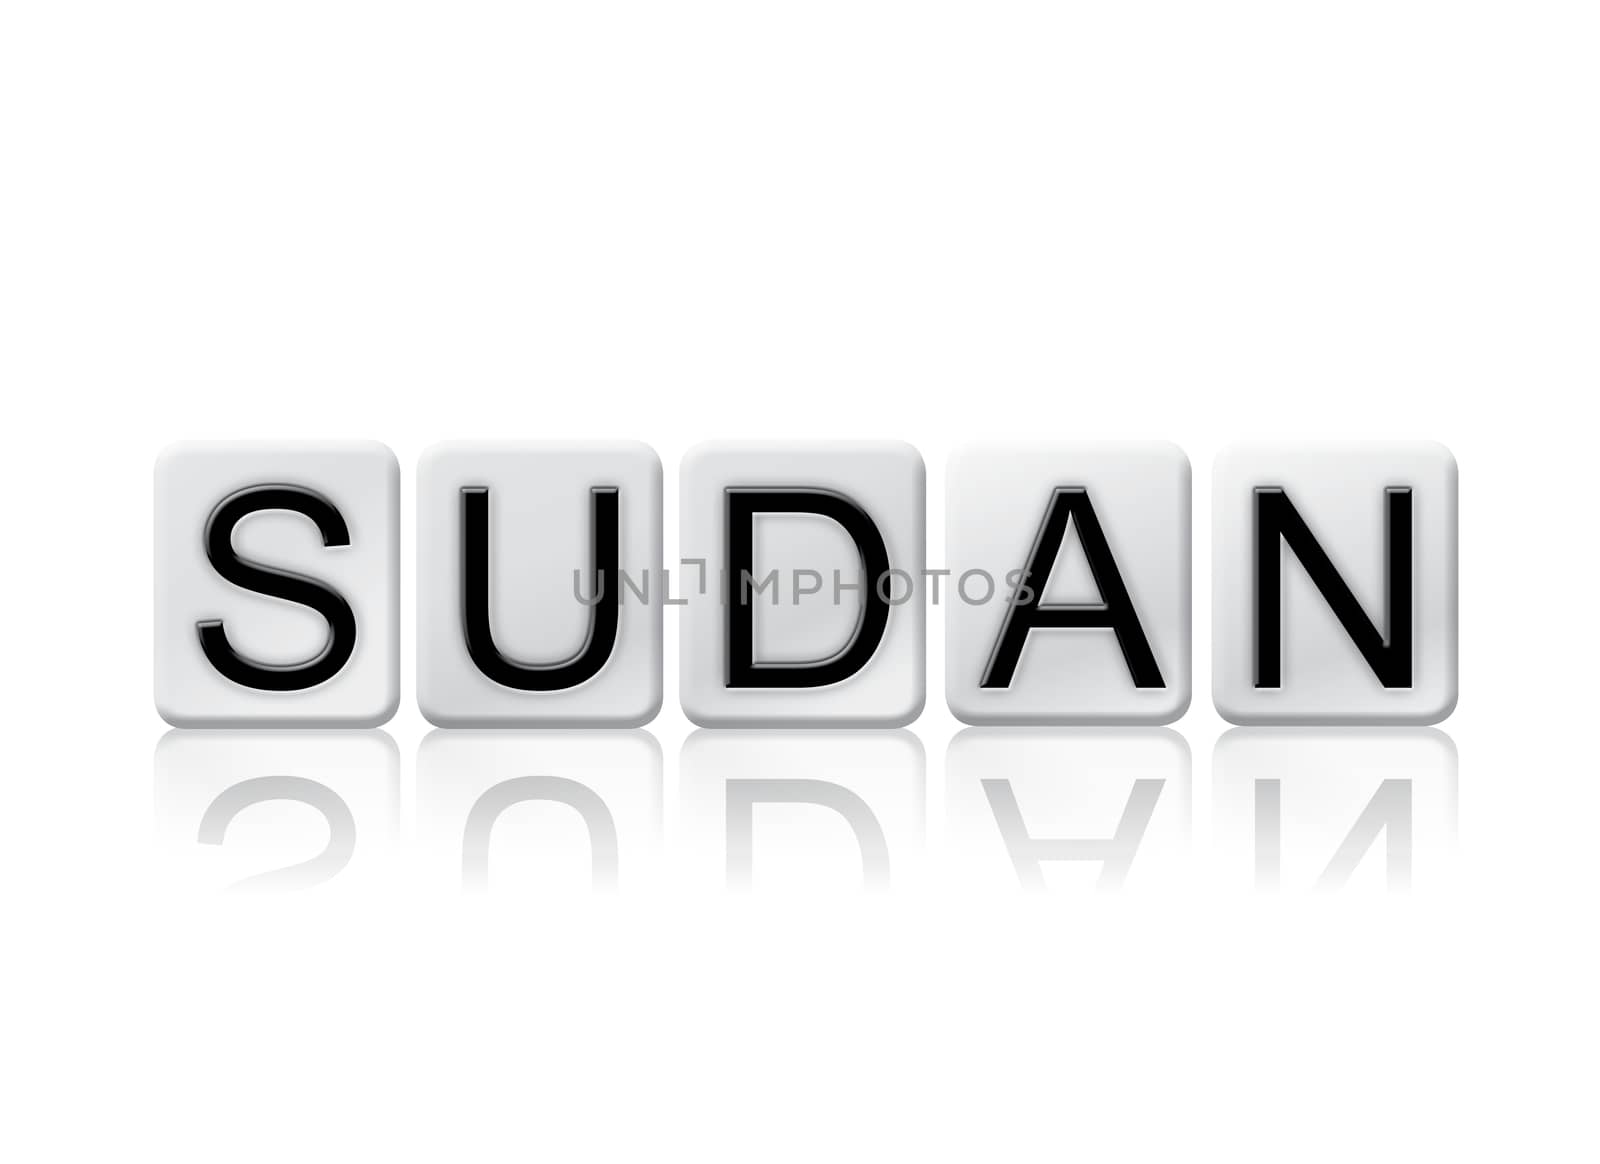 Sudan Isolated Tiled Letters Concept and Theme by enterlinedesign